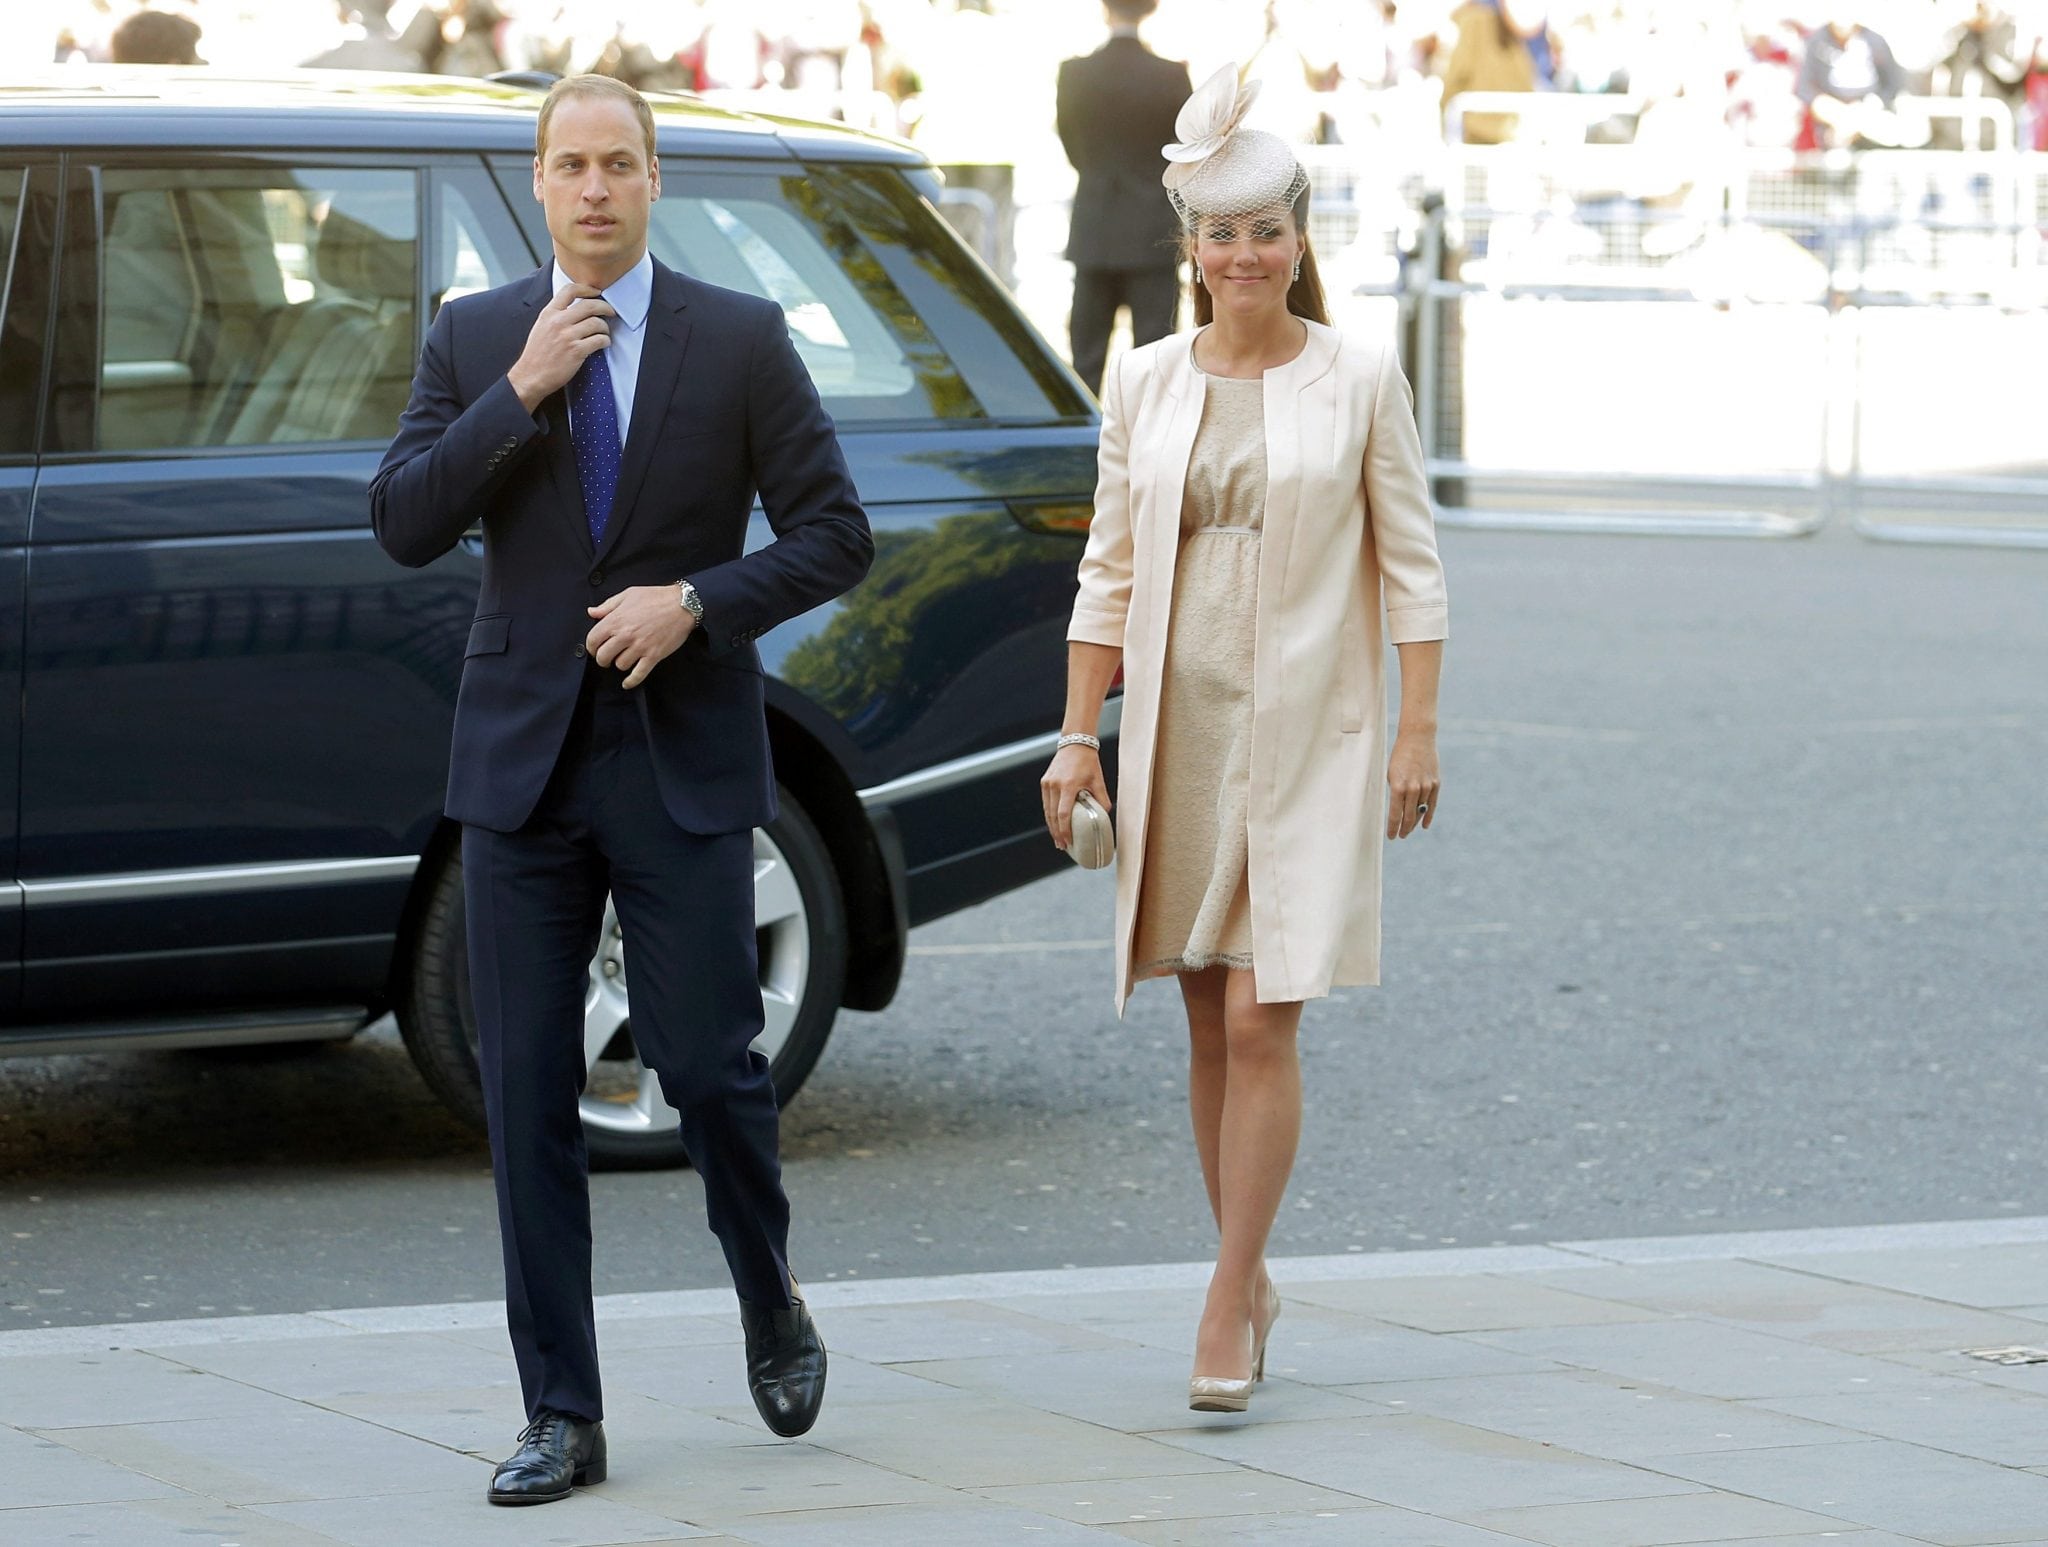 Britain's Prince William (L) and Catherine, Duchess of Cambridge arrive at Westminster Abbey to celebrate the 60th anniversary of Queen Elizabeth's coronation in London June 4, 2013.